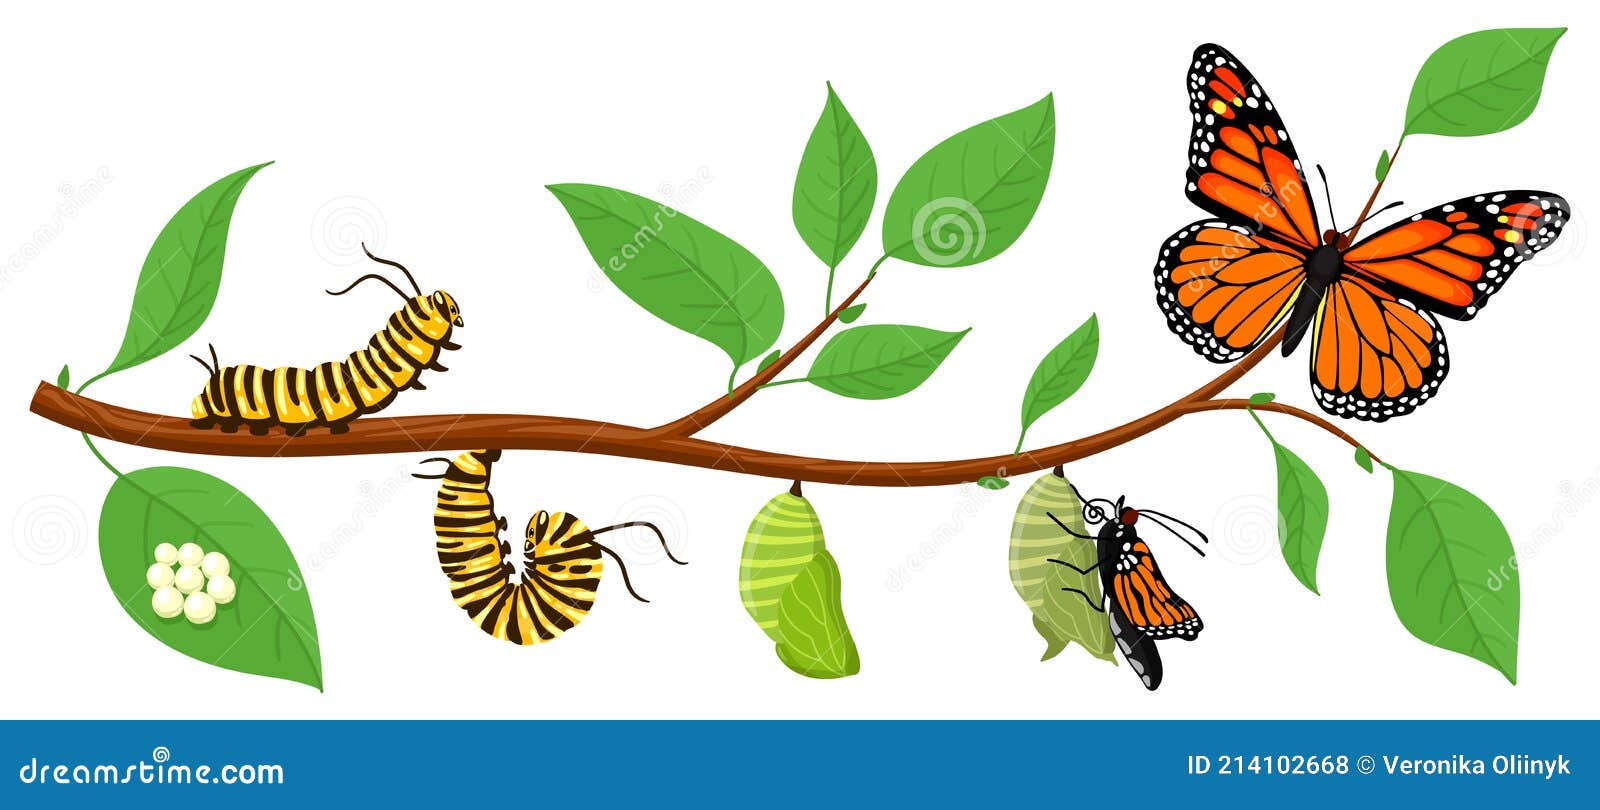 butterfly life cycle. cartoon caterpillar insects metamorphosis, eggs, larva, pupa, imago stages  